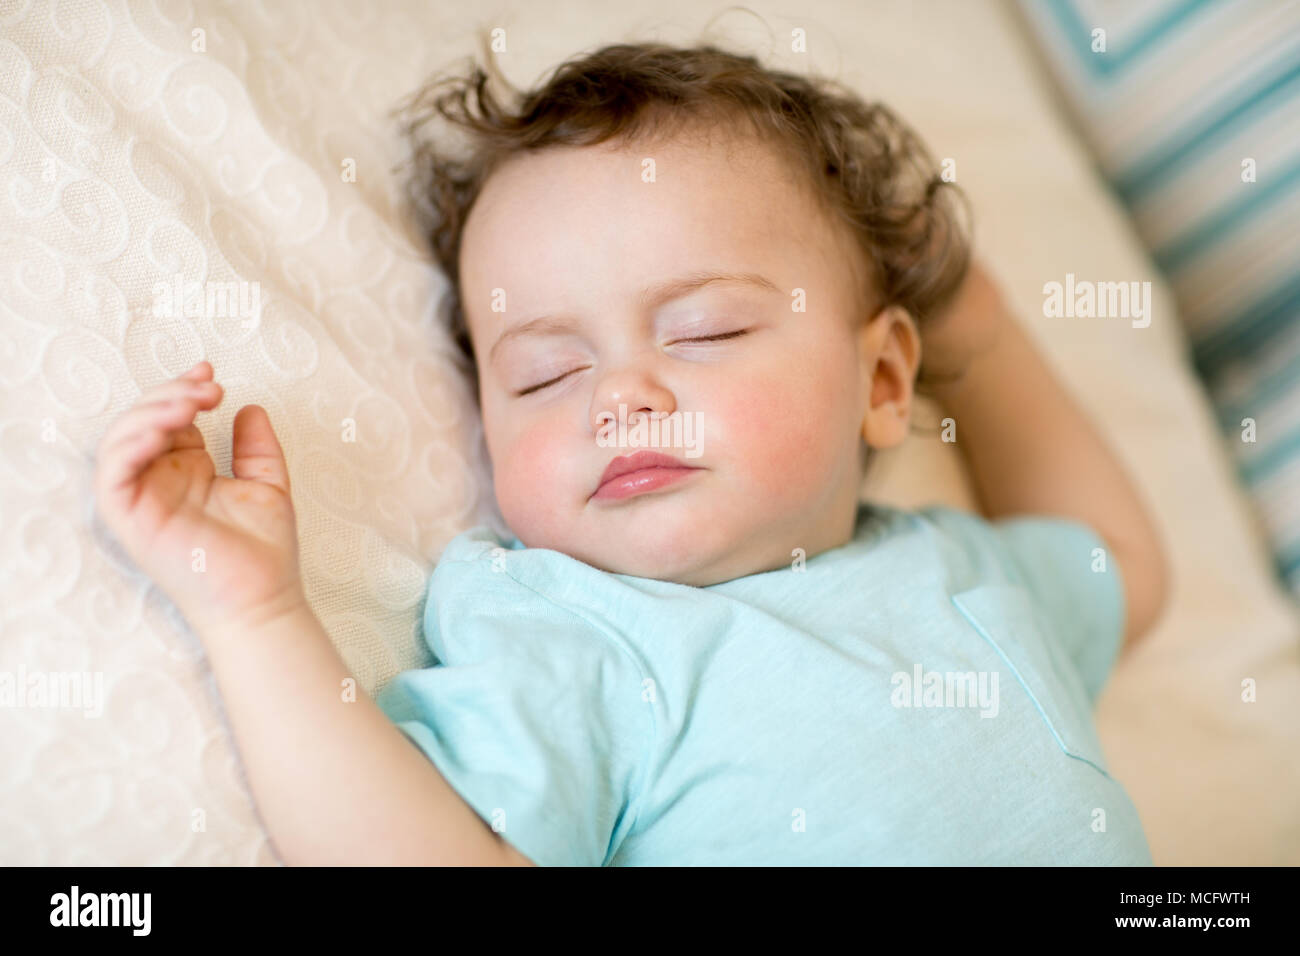 Close-up portrait of a beautiful sleeping baby on white Banque D'Images